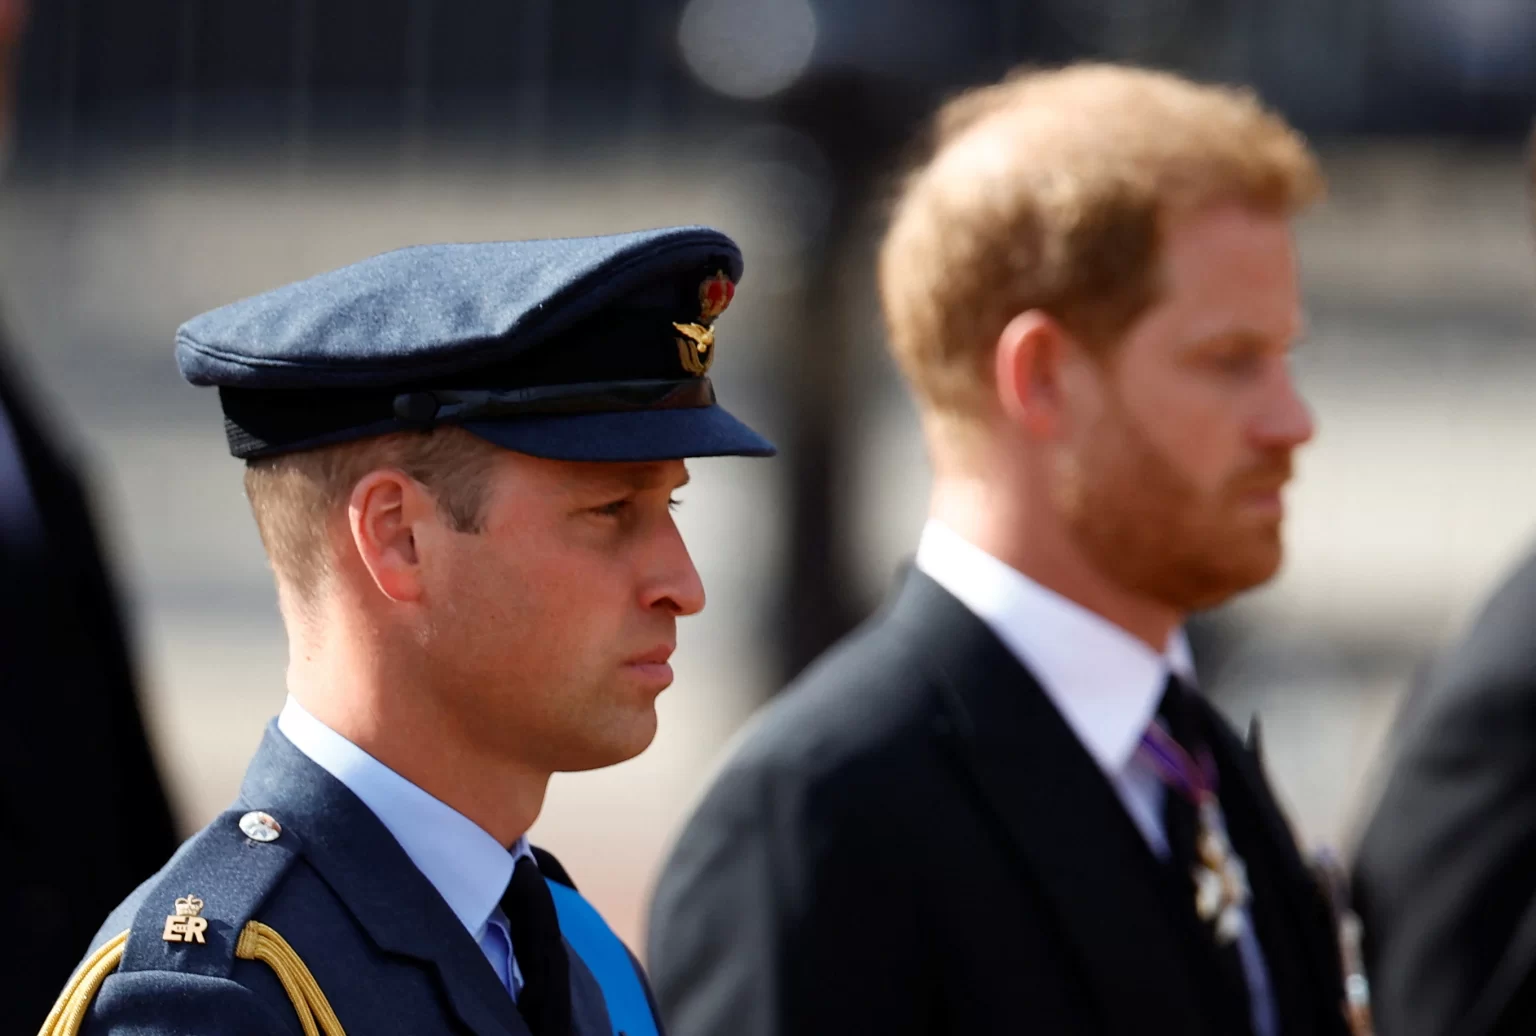 William and Harry side by side behind Queen's coffin